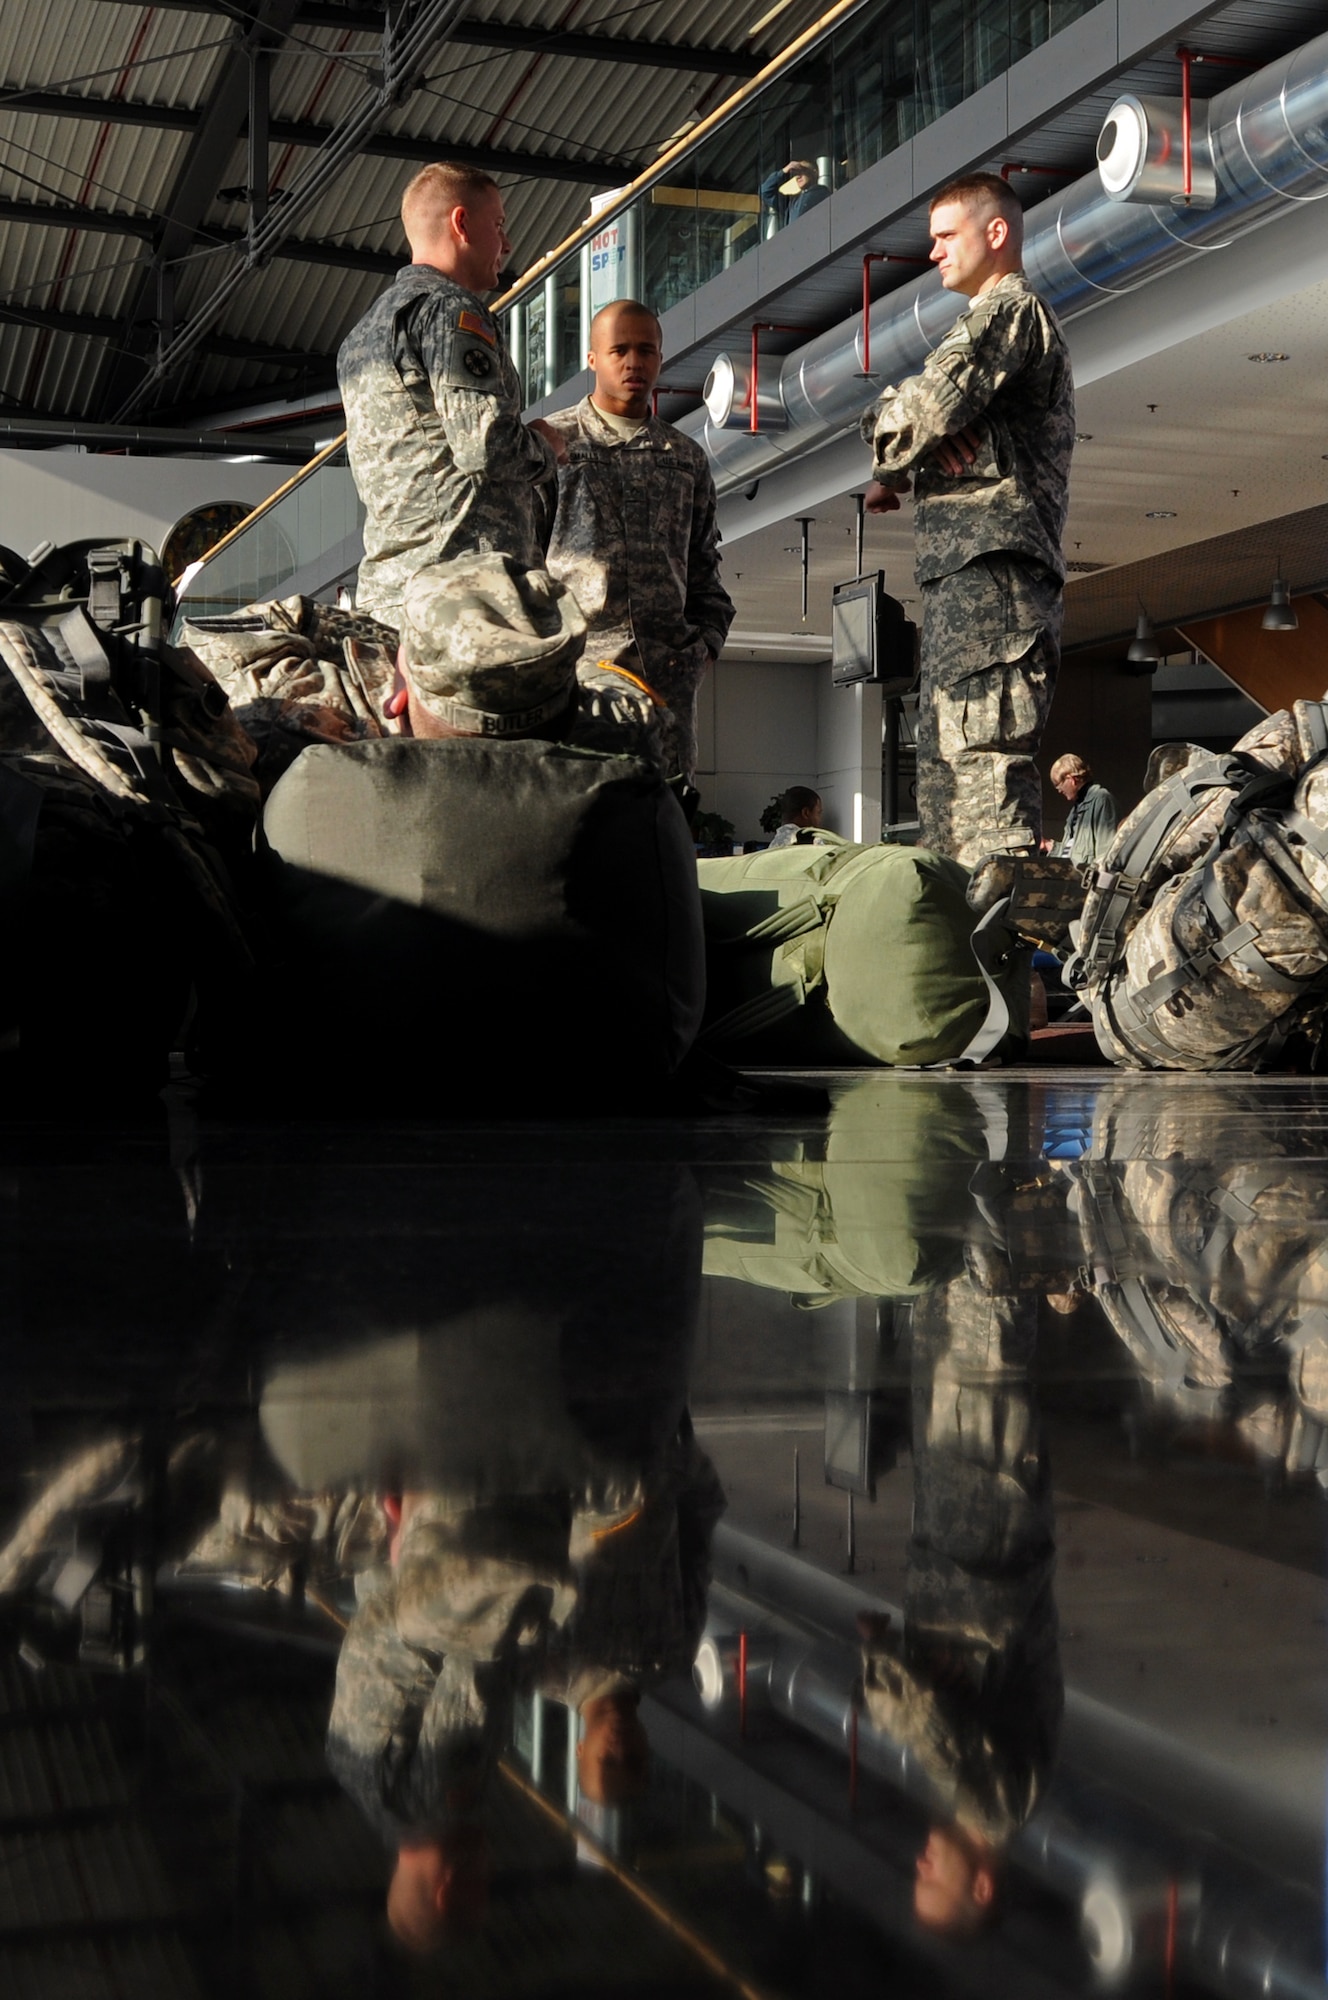 Army troops wait in the passenger area of the Ramstein Air Base Passenger Terminal before departing to the Area of Operation Jan. 26, 2009. The Ramstein PAX terminal, operated by the 721st Aerial Port Squadron, is the only one of its kind in Europe and is the pit stop point for most troops headed downrange.  (U.S. Air Force photo by Airman 1st Class Kenny Holston) 